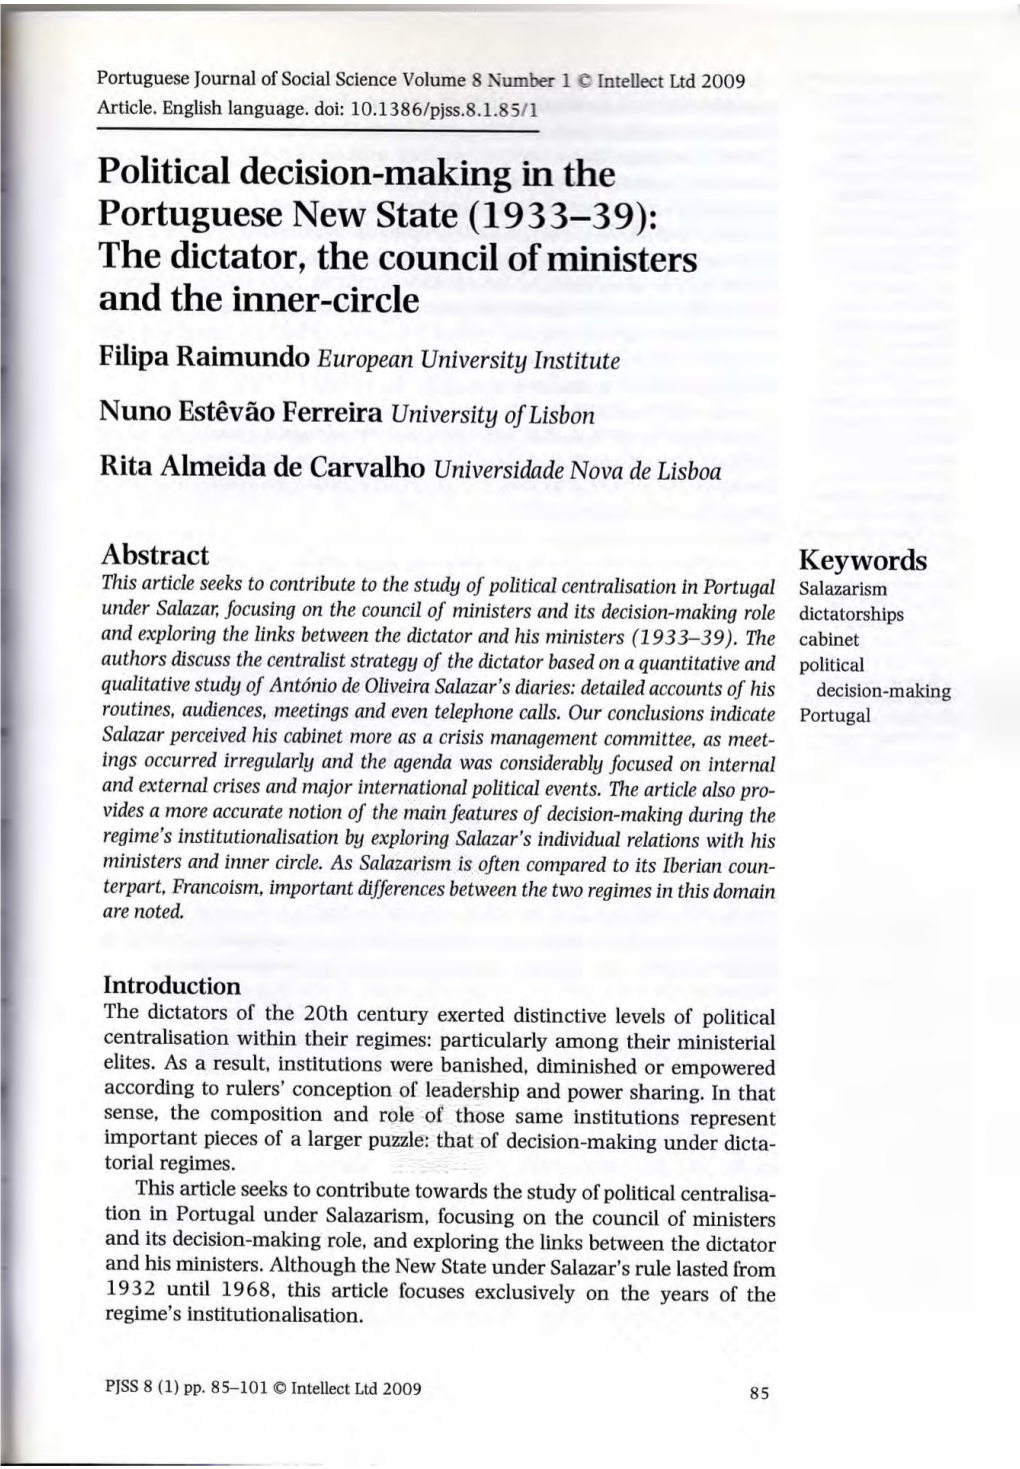 Political Decision-Making in the Portuguese New State (1933-39): the Dictator, the Council of Ministers and the Inner-Circle